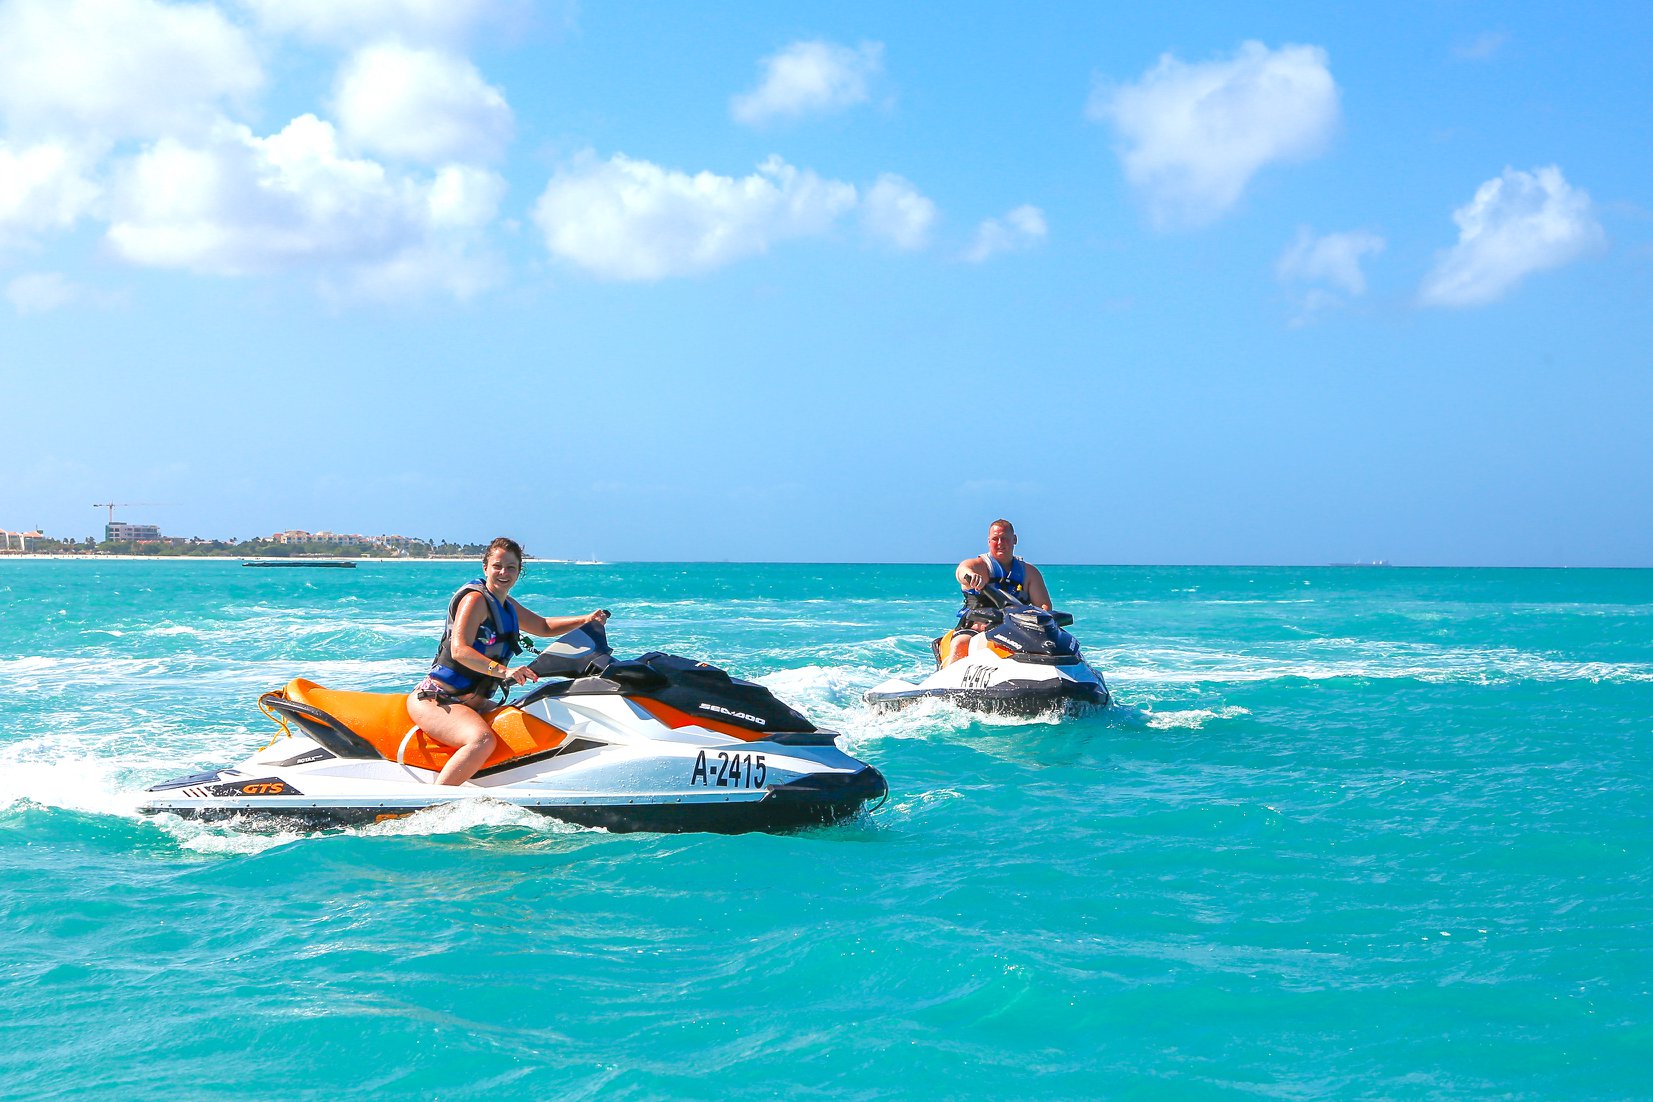 WAVERUNNERS EXCITEMENT BY AWC Aruba - vacaystore.com